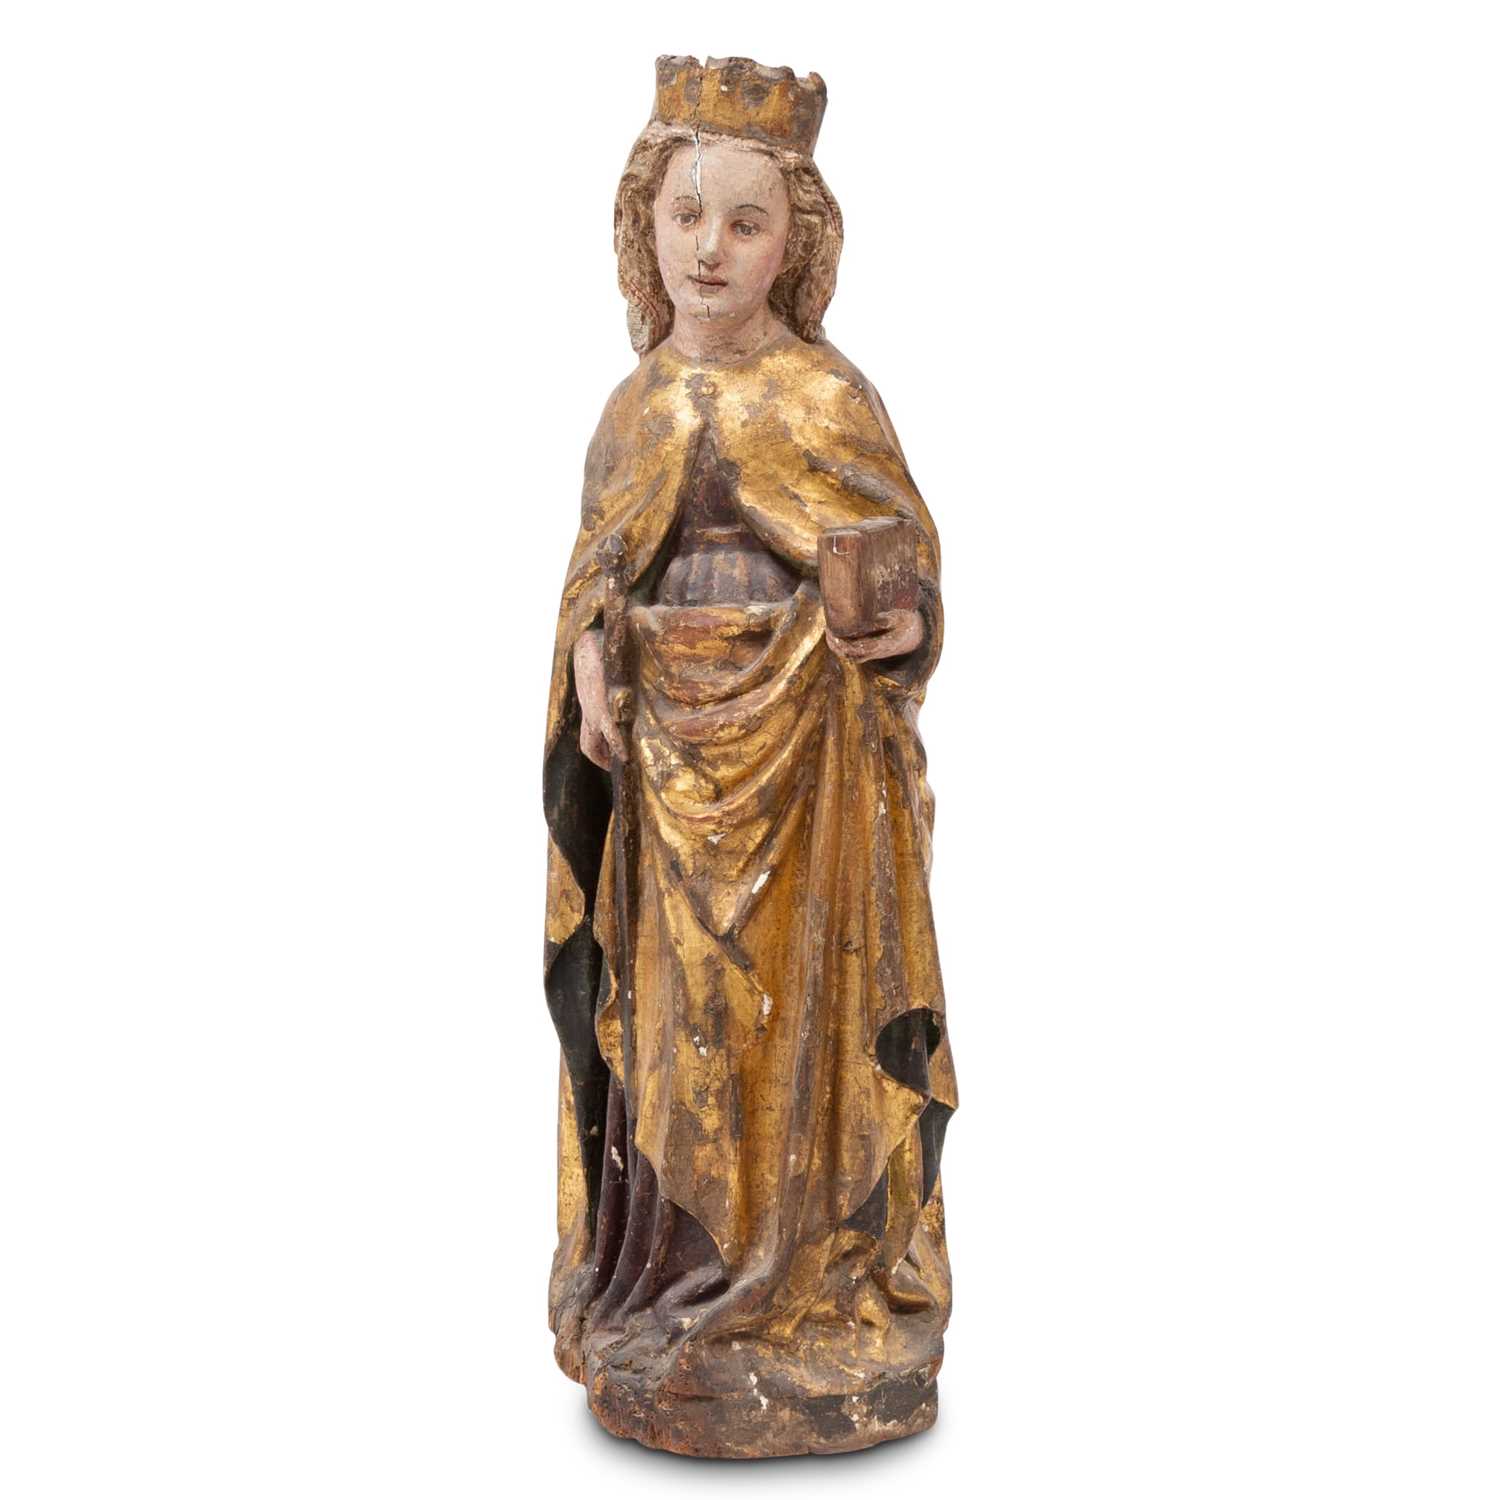 Lot 421 - South German Polychrome and Giltwood Figure of St. Catherine